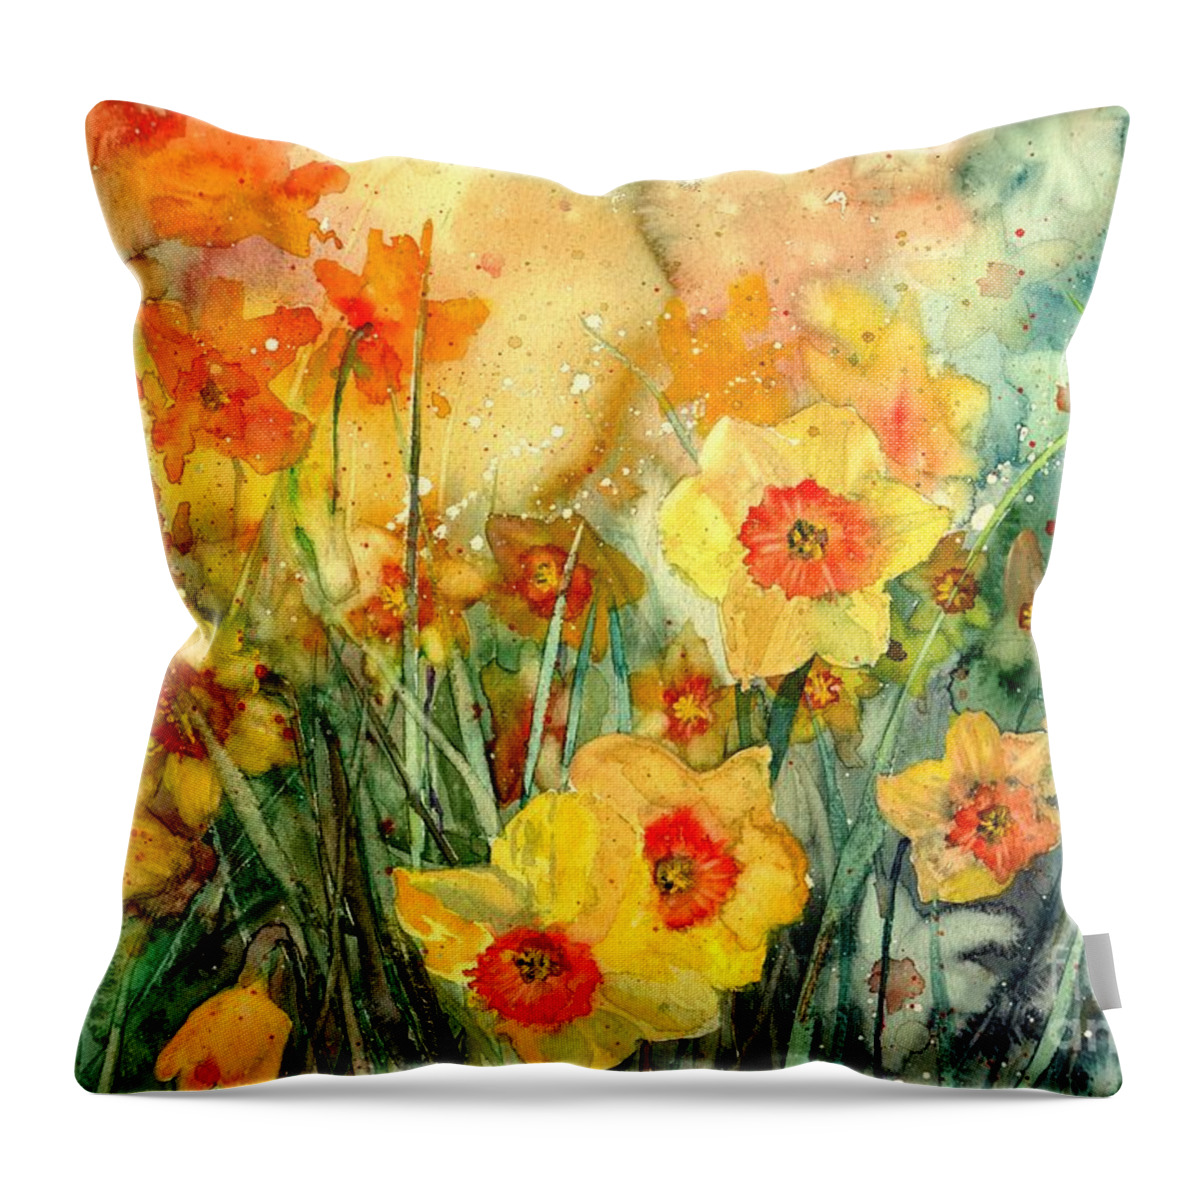 Breeze Throw Pillow featuring the painting Golden Daffodils by Suzann Sines